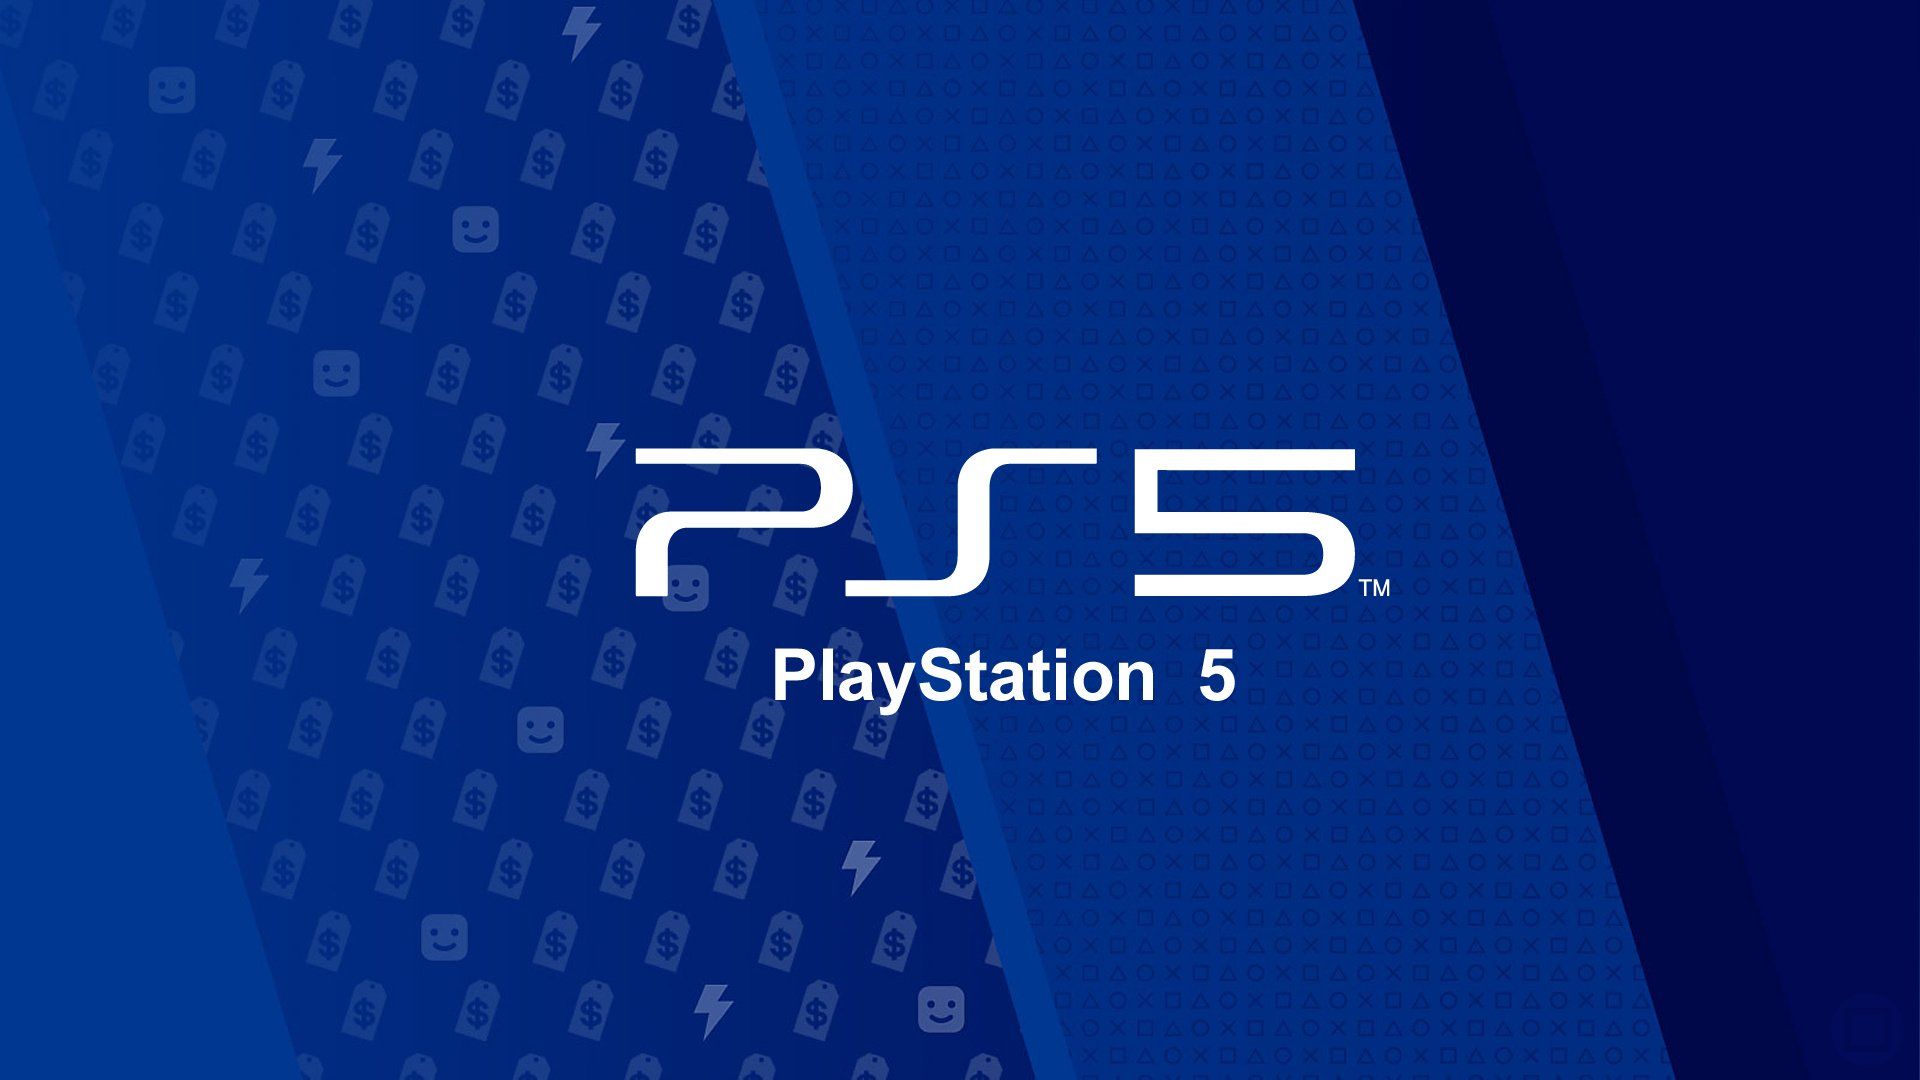 PS5's Most 'Unique Elements' and 'Biggest Changes' Have Yet to Be